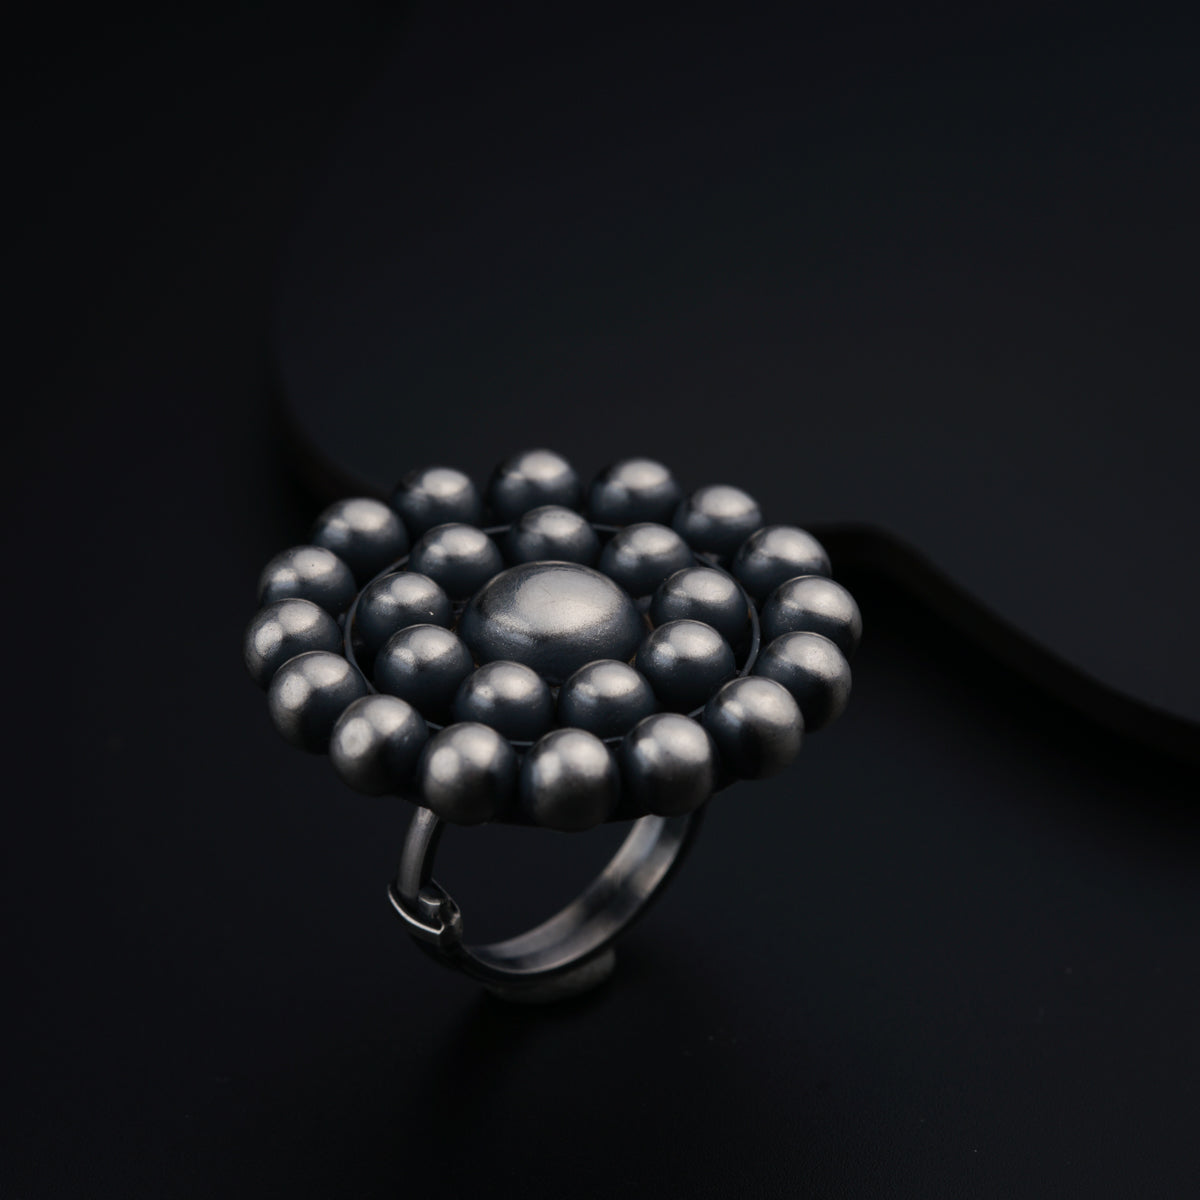 a silver ring with balls on it on a black surface